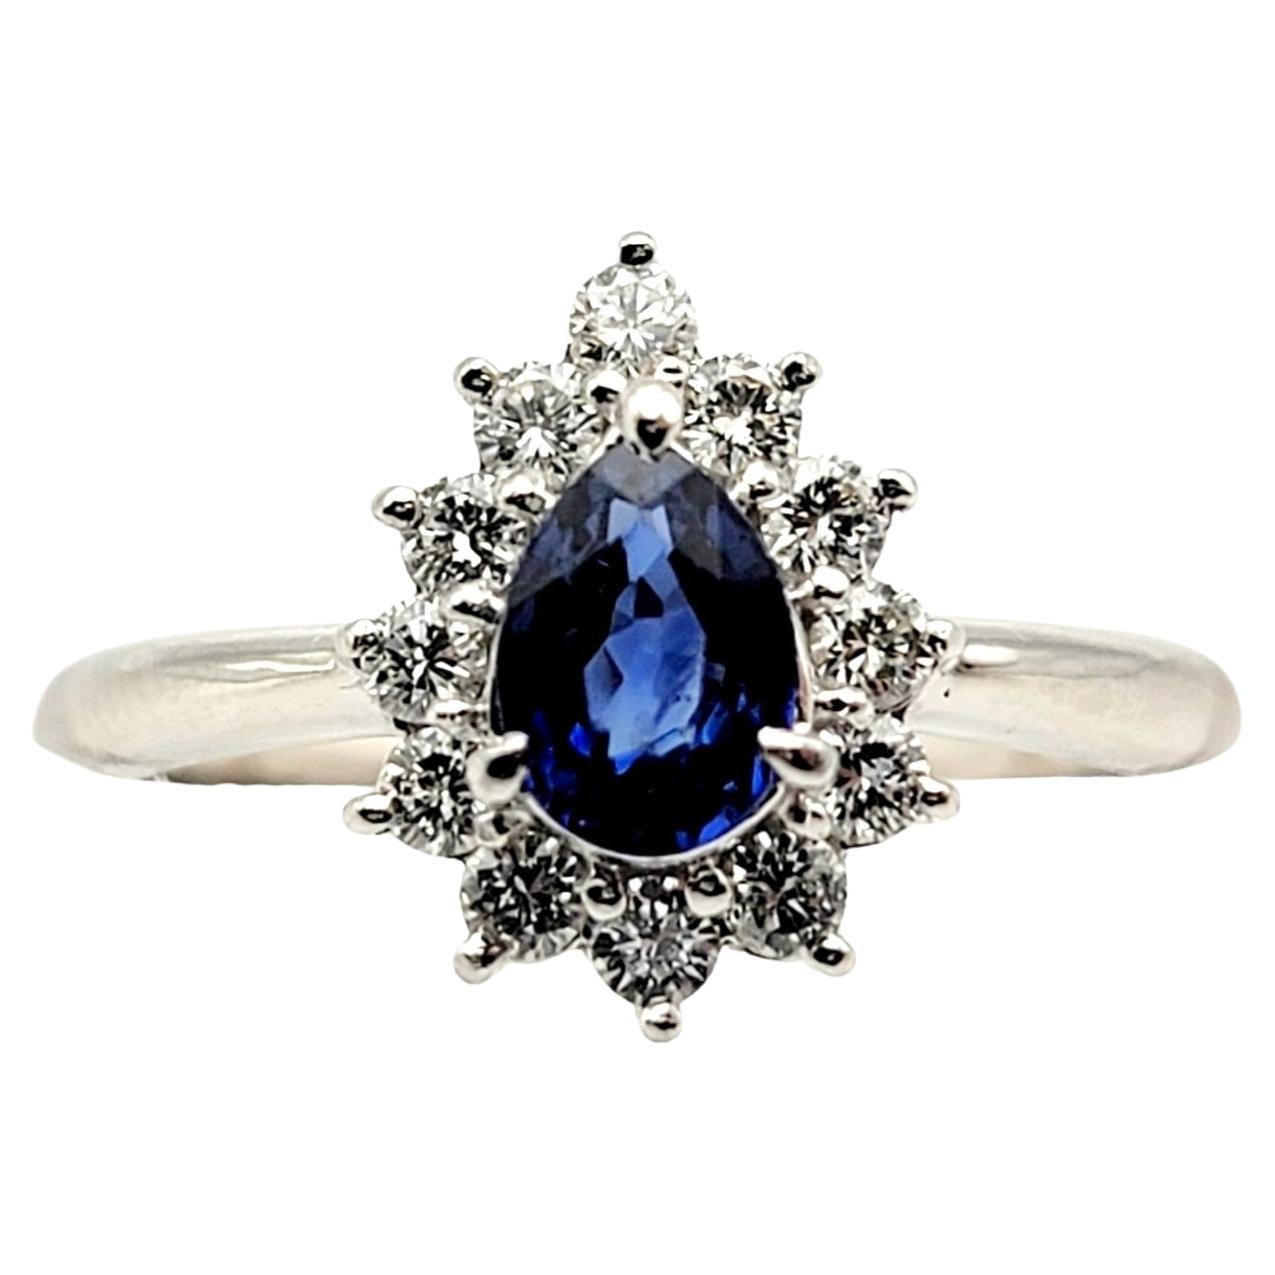 Ring size 5.75

Simple yet stunning sapphire and diamond halo ring. Understated and elegant, the pear shaped blue stone really pops against the icy white diamonds and polished platinum finish.  

Ring size: 5.75
Weight: 5.0 grams
Metal: